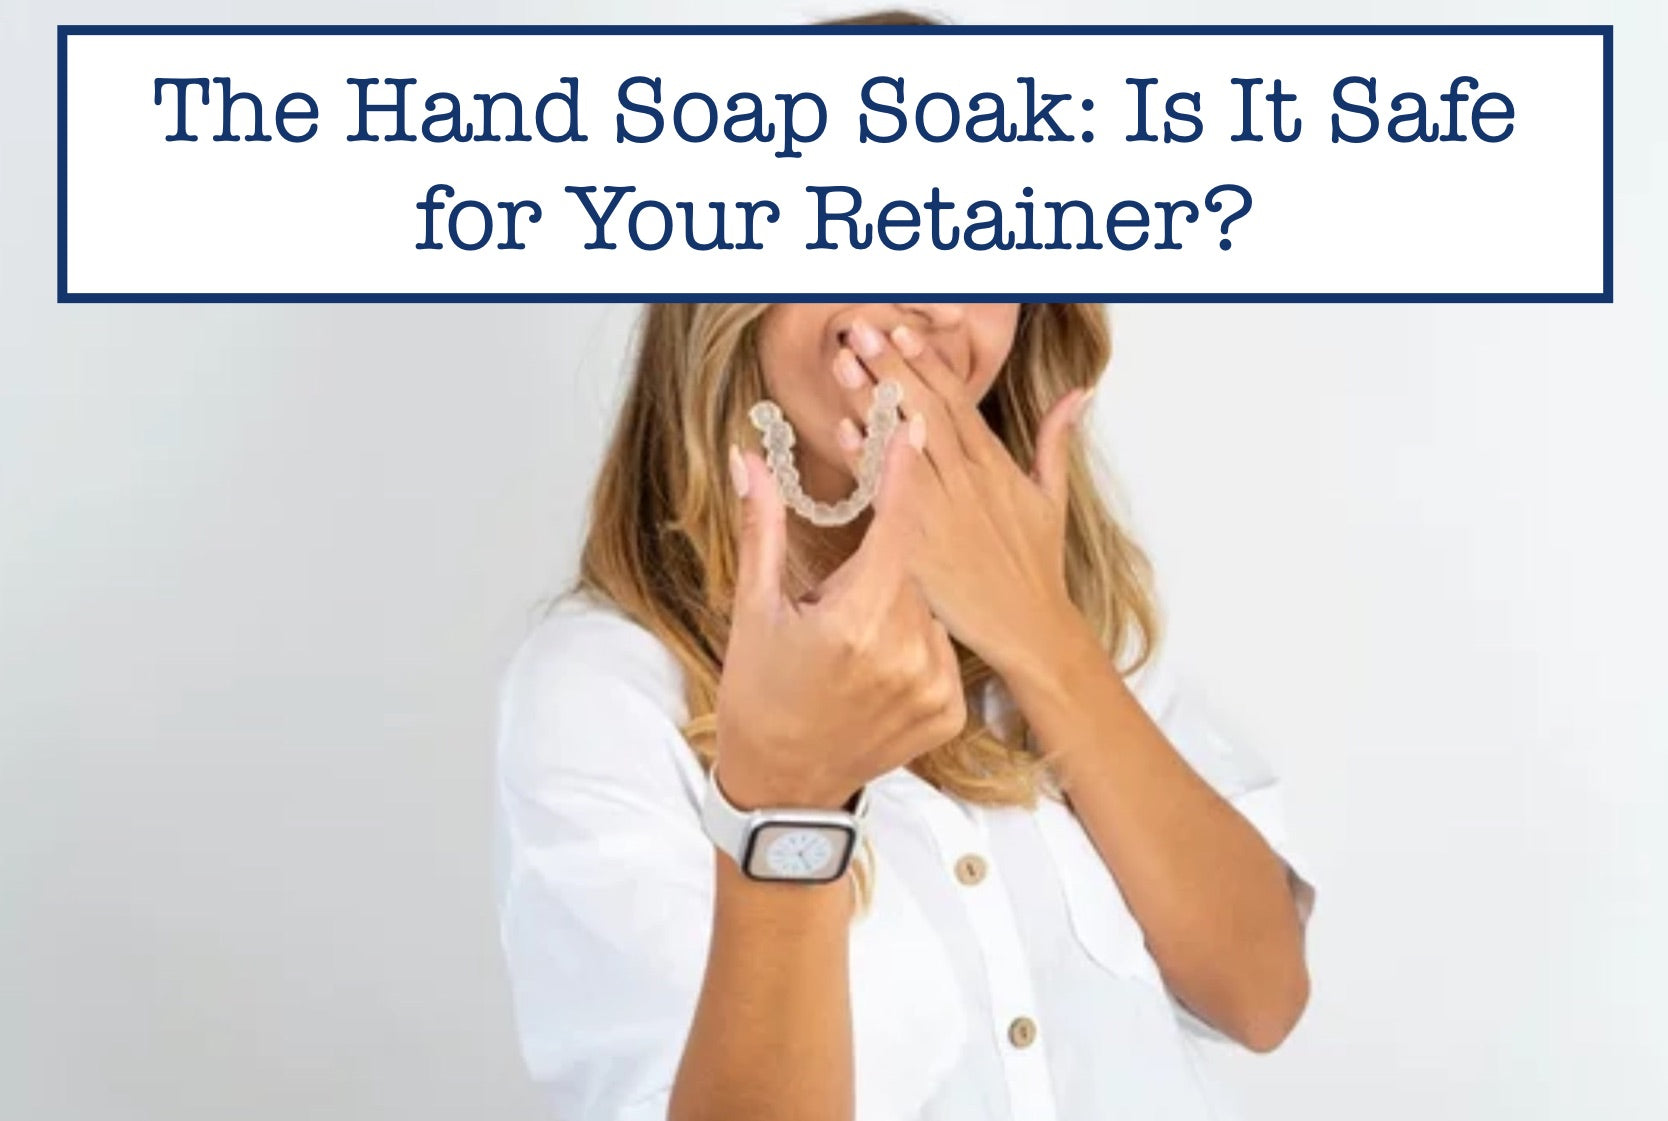 The Hand Soap Soak: Is It Safe for Your Retainer?